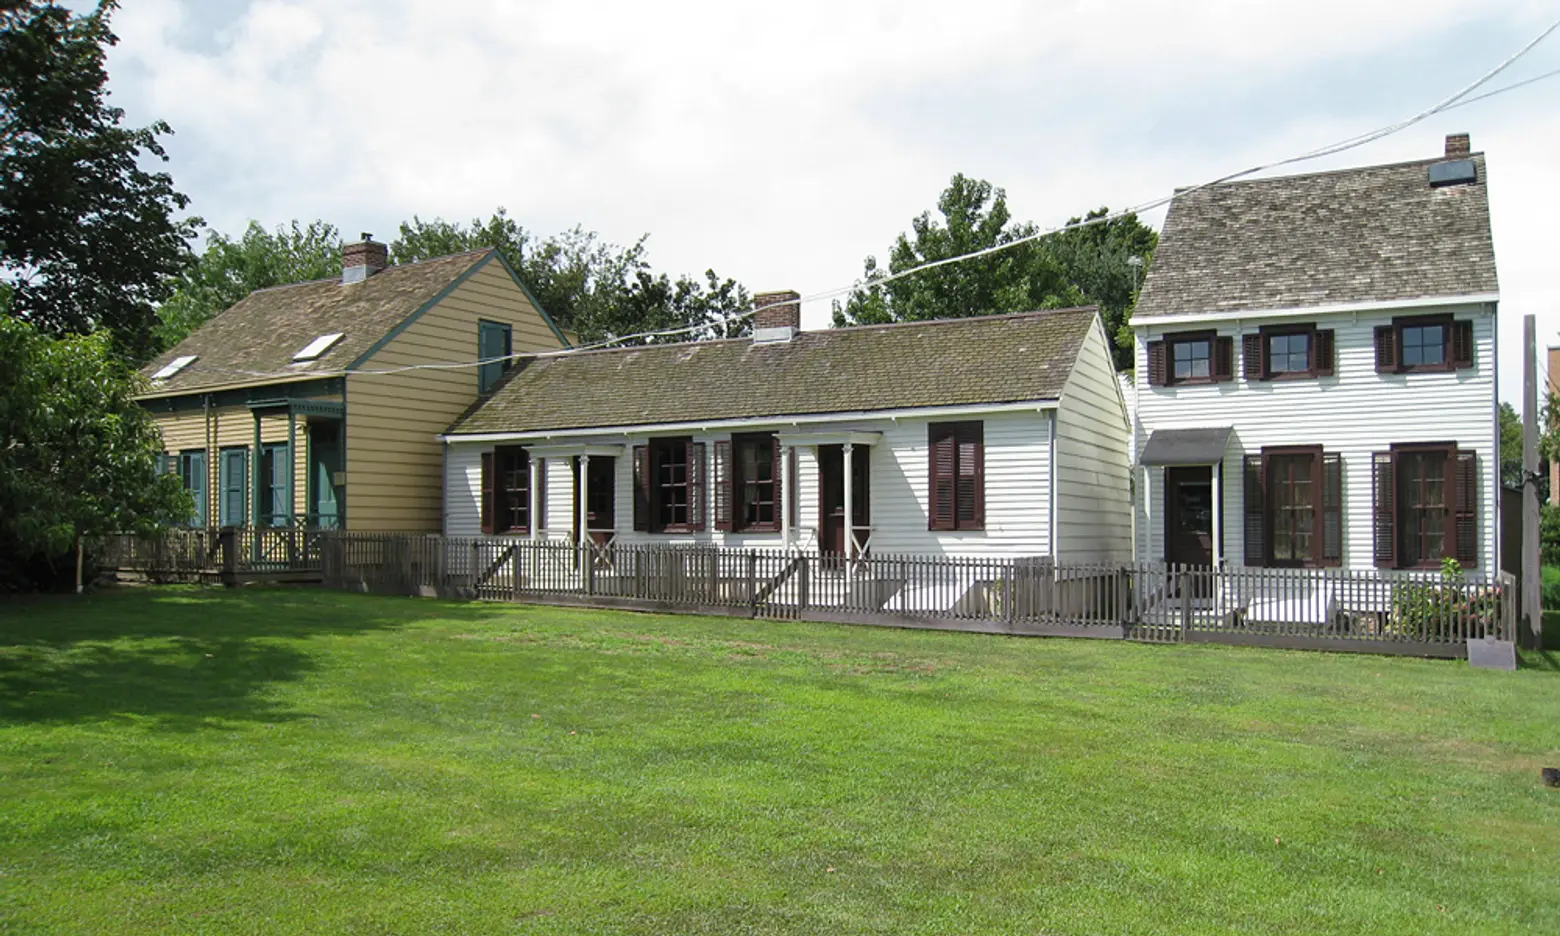 Brooklyn’s Weeksville Heritage Center launches crowd-funding campaign to stay afloat